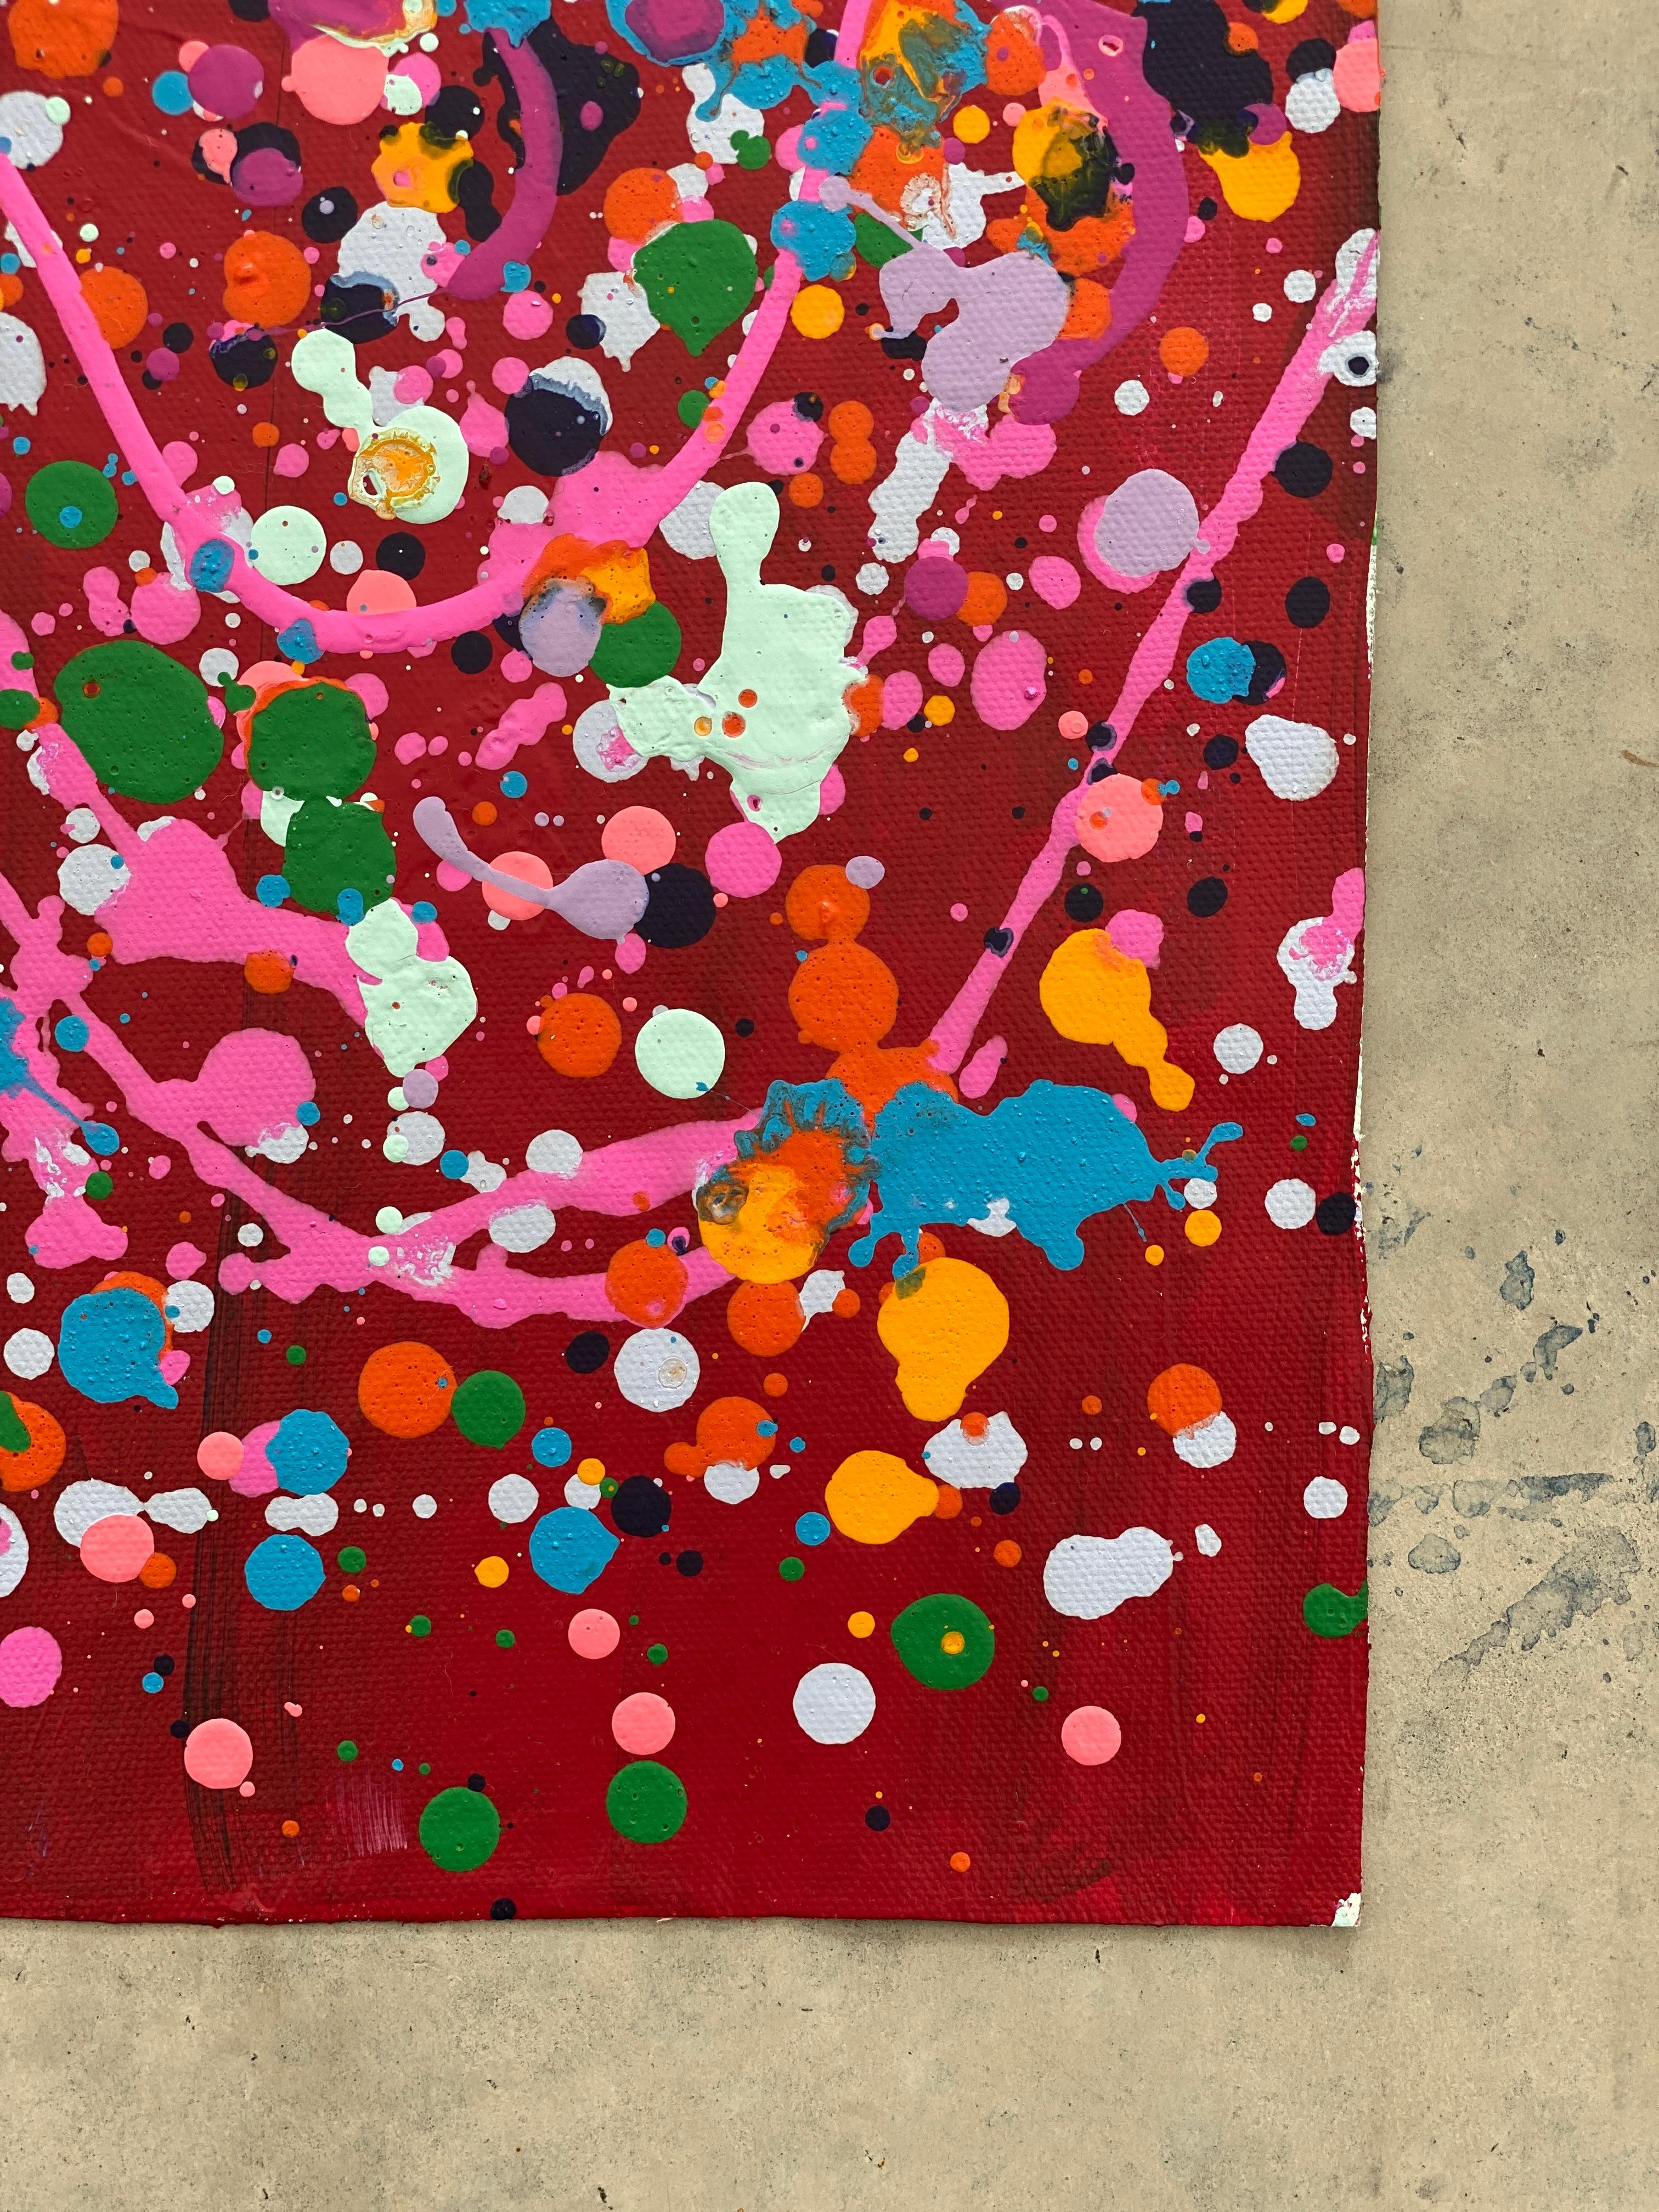 Colorful spatter no8 drip abstract expressionist Jackson Pollock red pink green - Abstract Painting by Kathleen Rhee